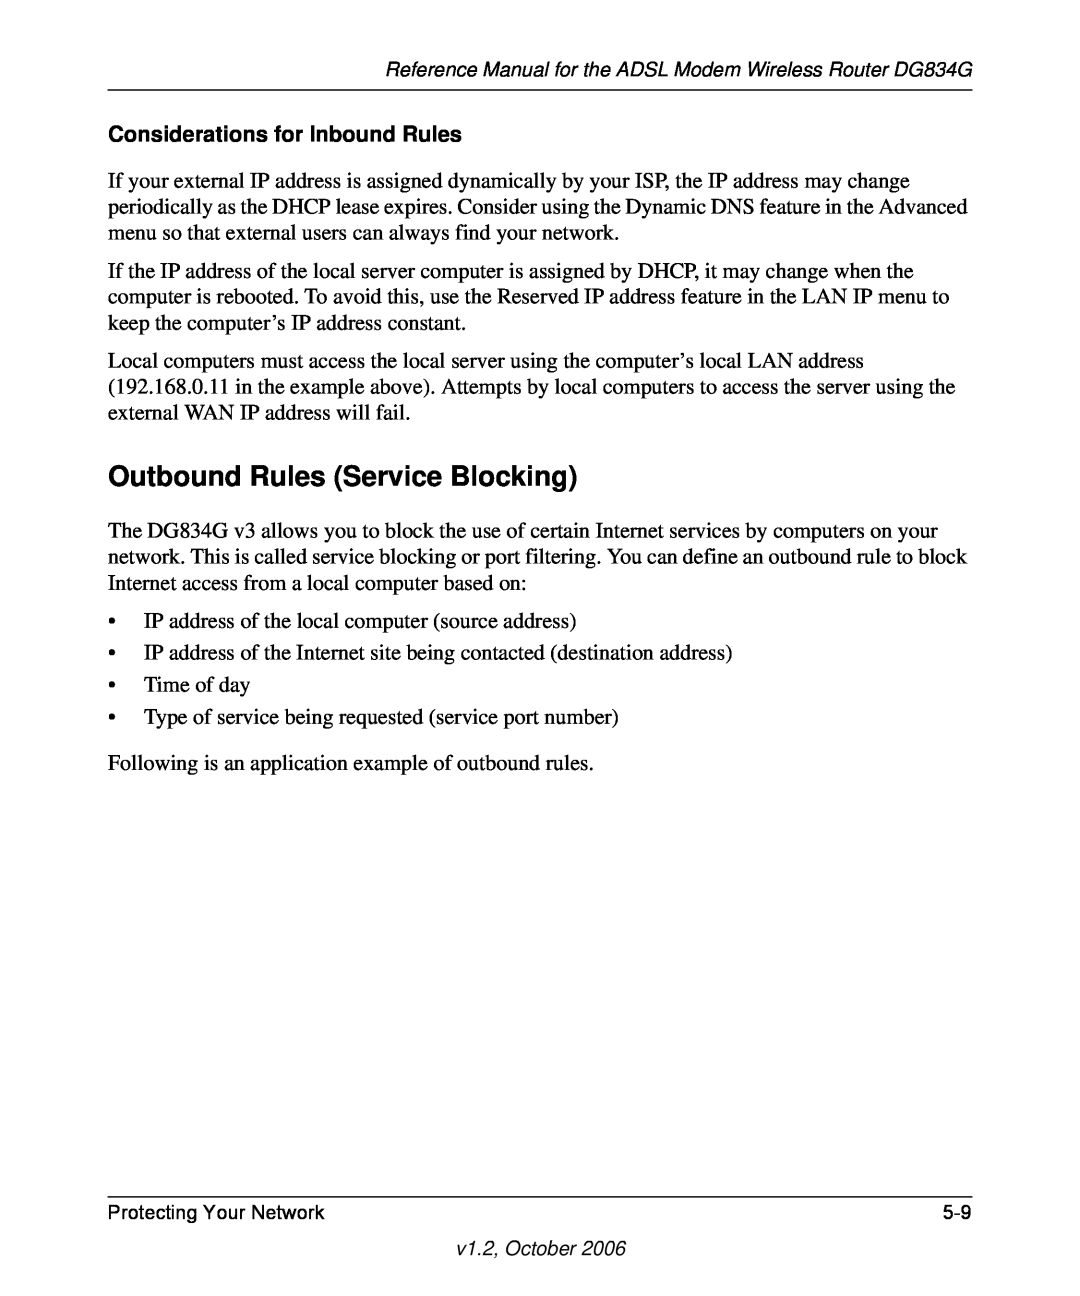 NETGEAR DG834G manual Outbound Rules Service Blocking, Considerations for Inbound Rules 